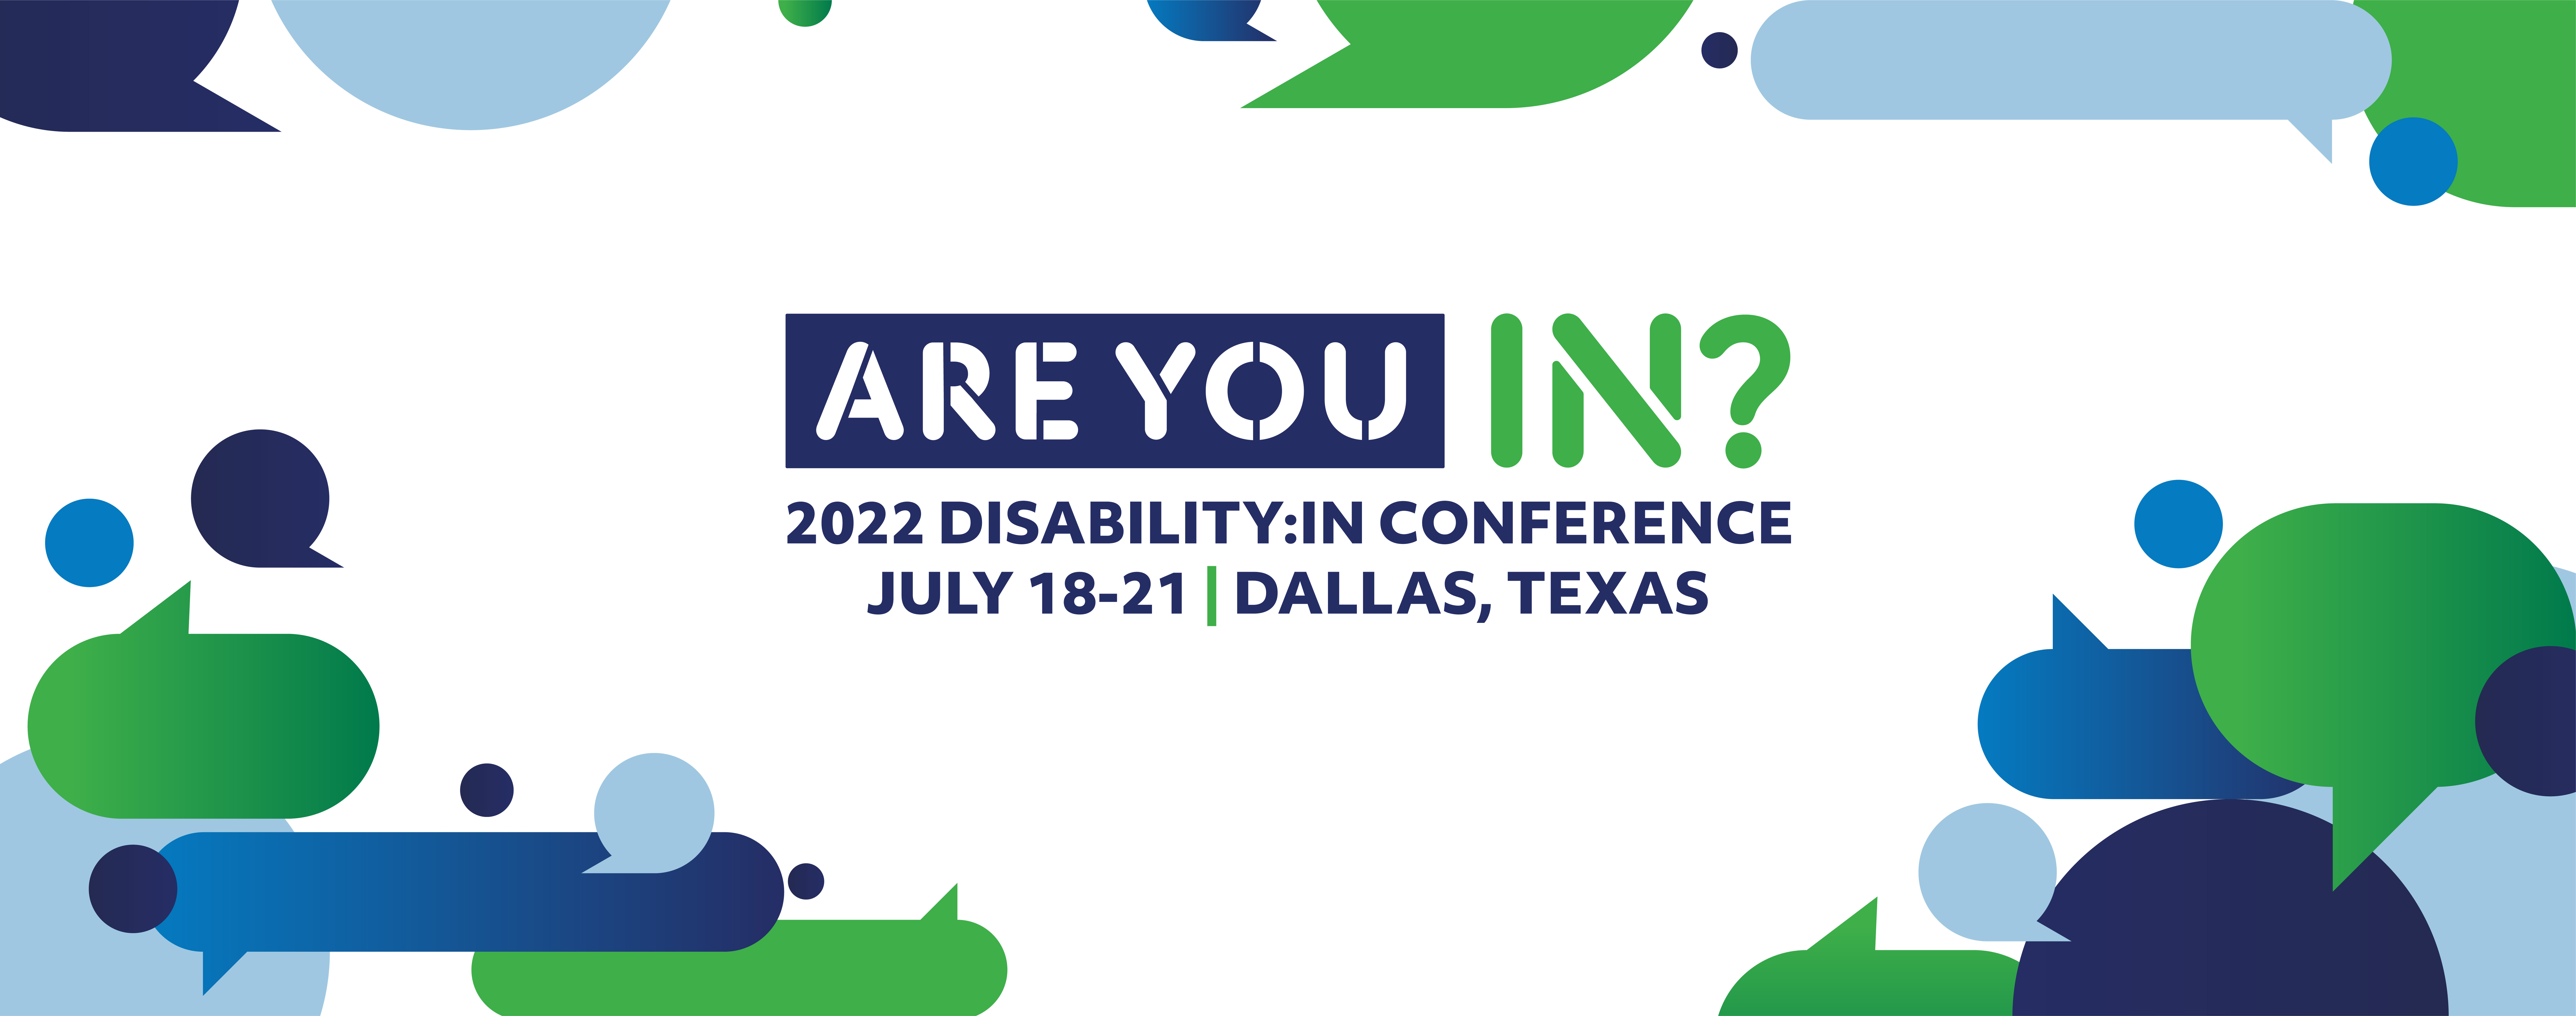 Are You IN? 2022 Disability:IN Conference from July 18-21 in Dallas, Texas. Geometric speech bubble designs in greens and blues adorn the edges of the graphic against a white background.